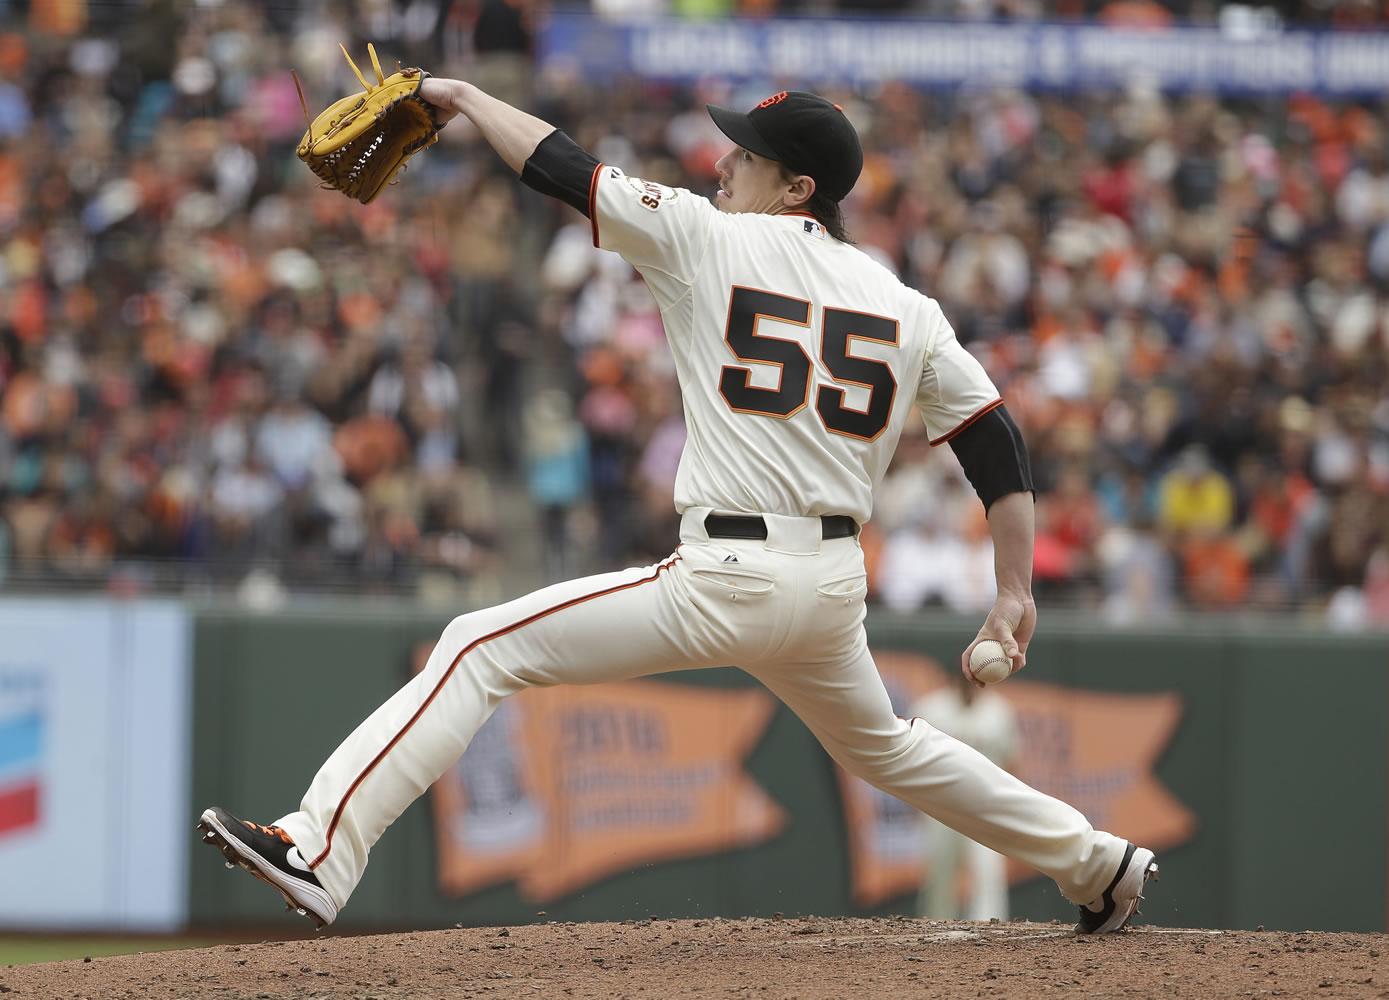 Giants' Tim Lincecum throws no-hitter against Padres - Los Angeles